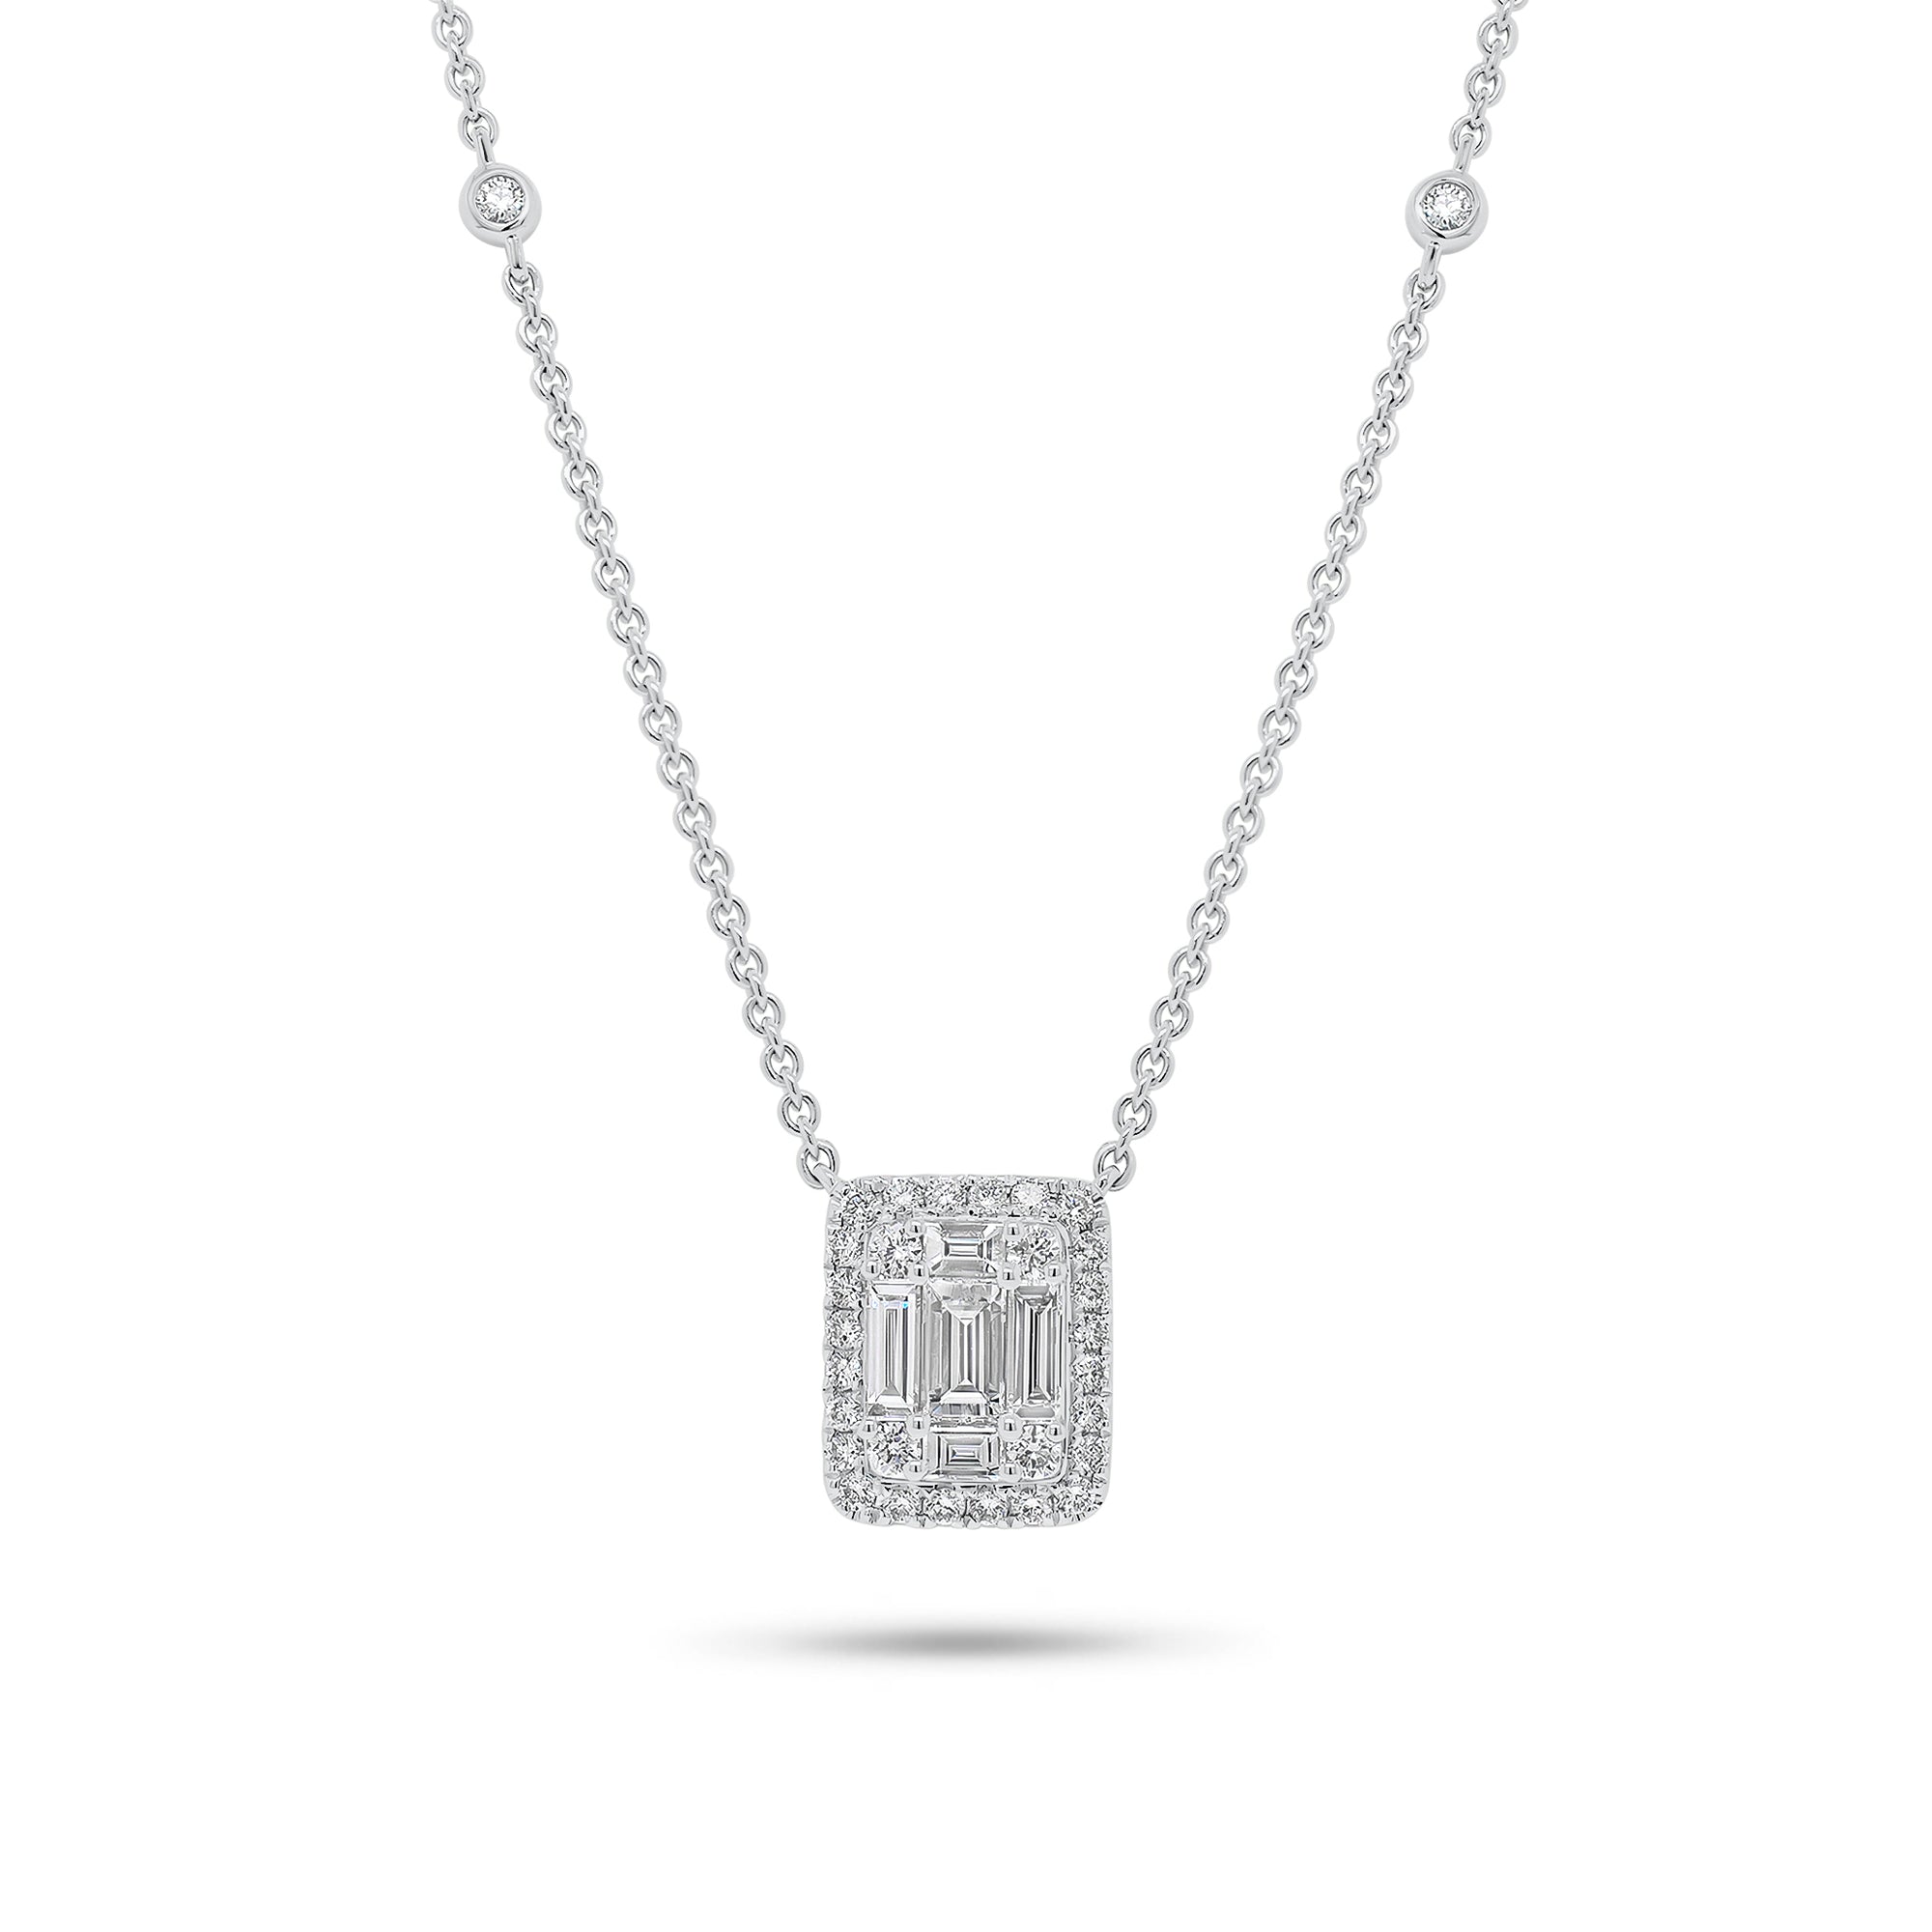 Solid 18k white gold weighing 4.22 grams with 32 round diamonds weighing 0.29 carats and 5 slim baguettes weighing 0.45 carats Emerald-Cut Diamond Illusion Pendant Necklace | Nuha Jewelers